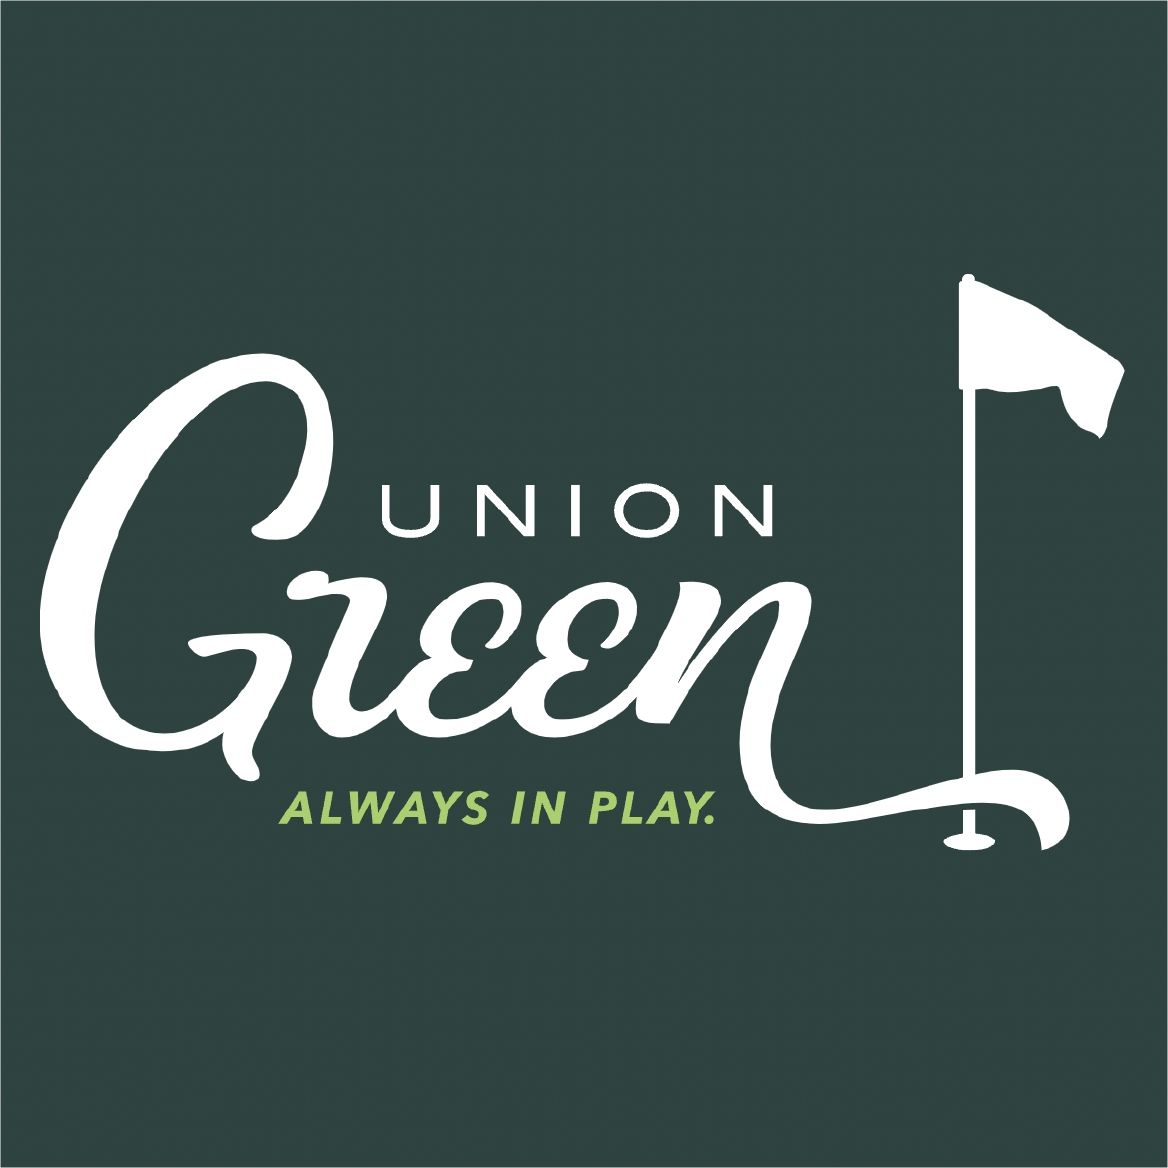 Union Geen logo.png